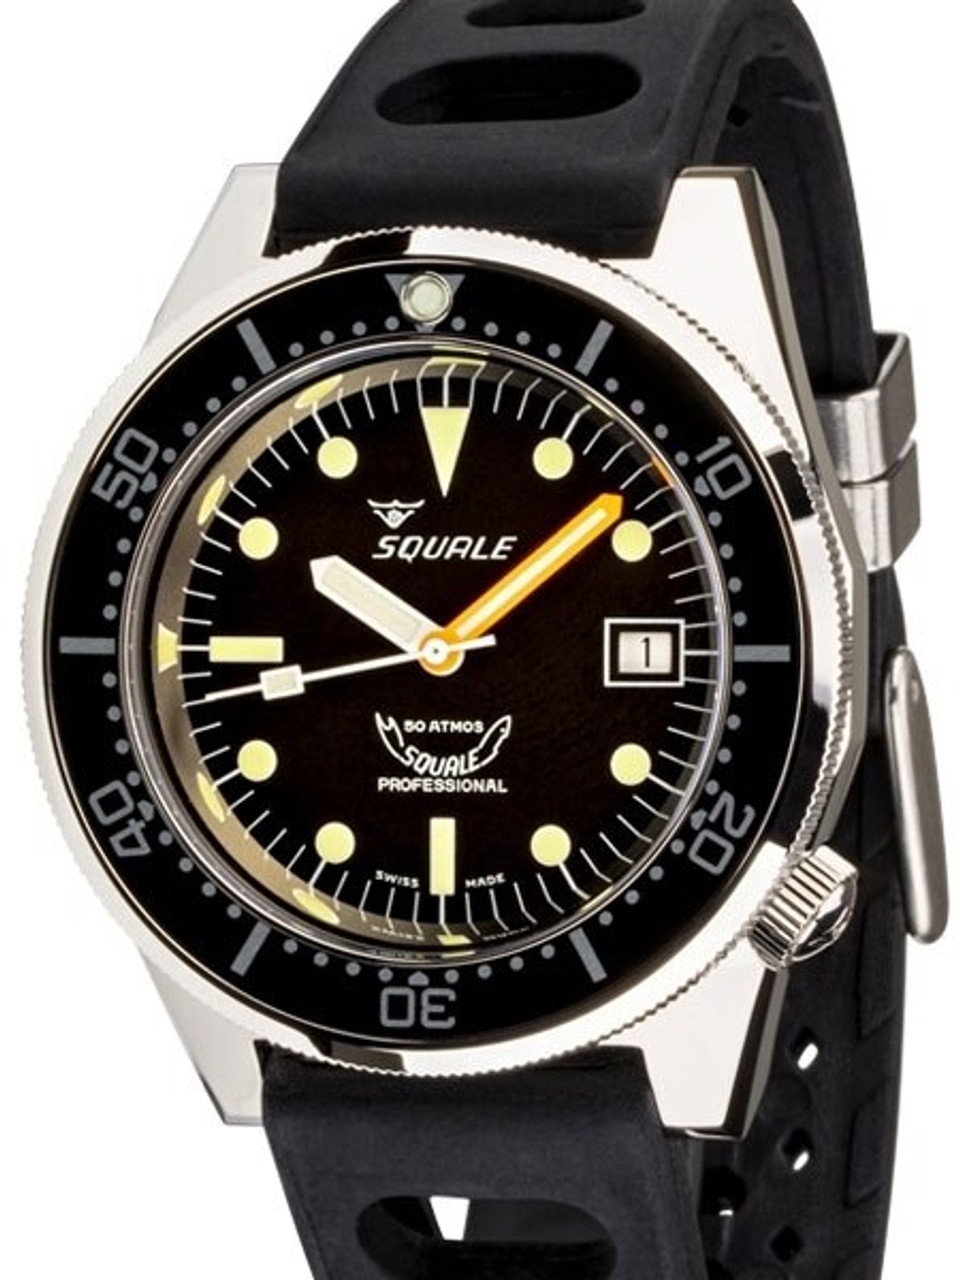 Squale 500 meter Professional Swiss Automatic Dive watch with ...